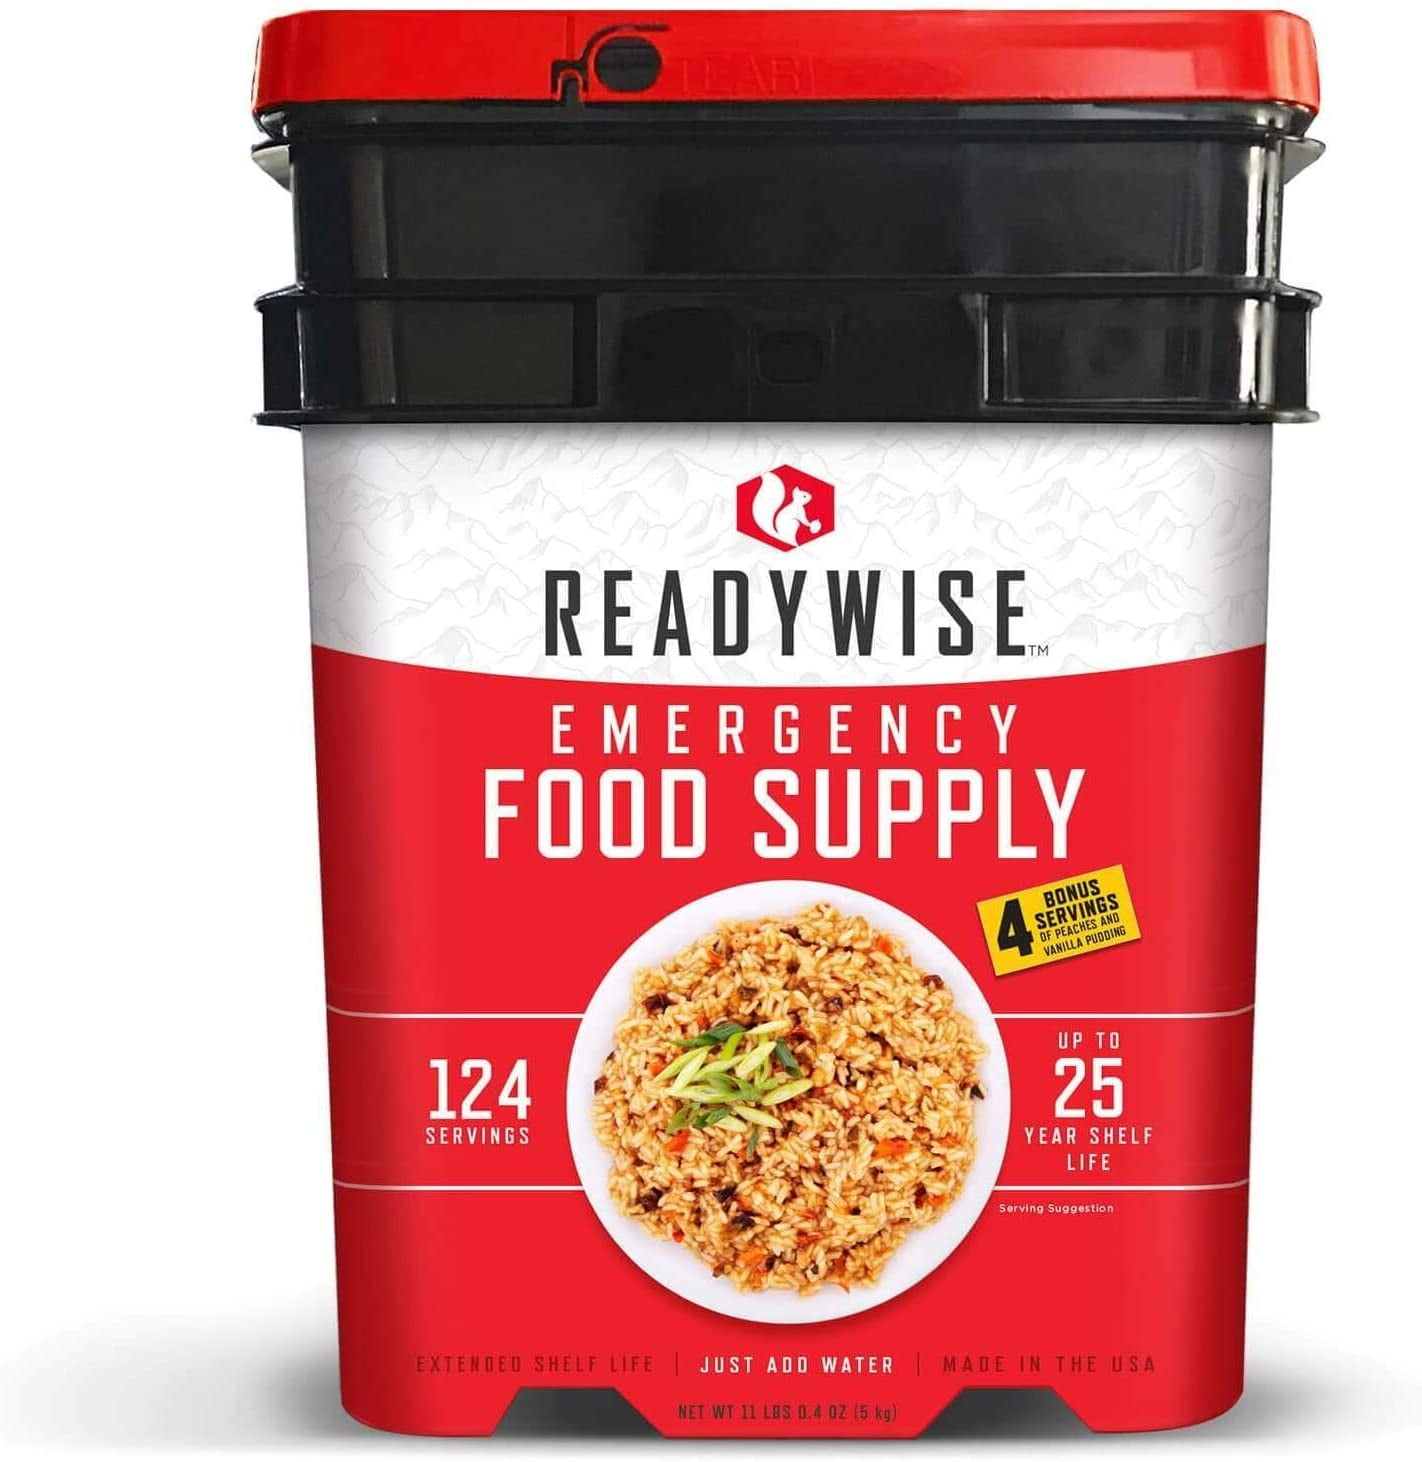 chef's banquet ark 330 emergency food supply kit - 4-Week Emergency Food Supply (2,000+ calories/day) - Ready Hour